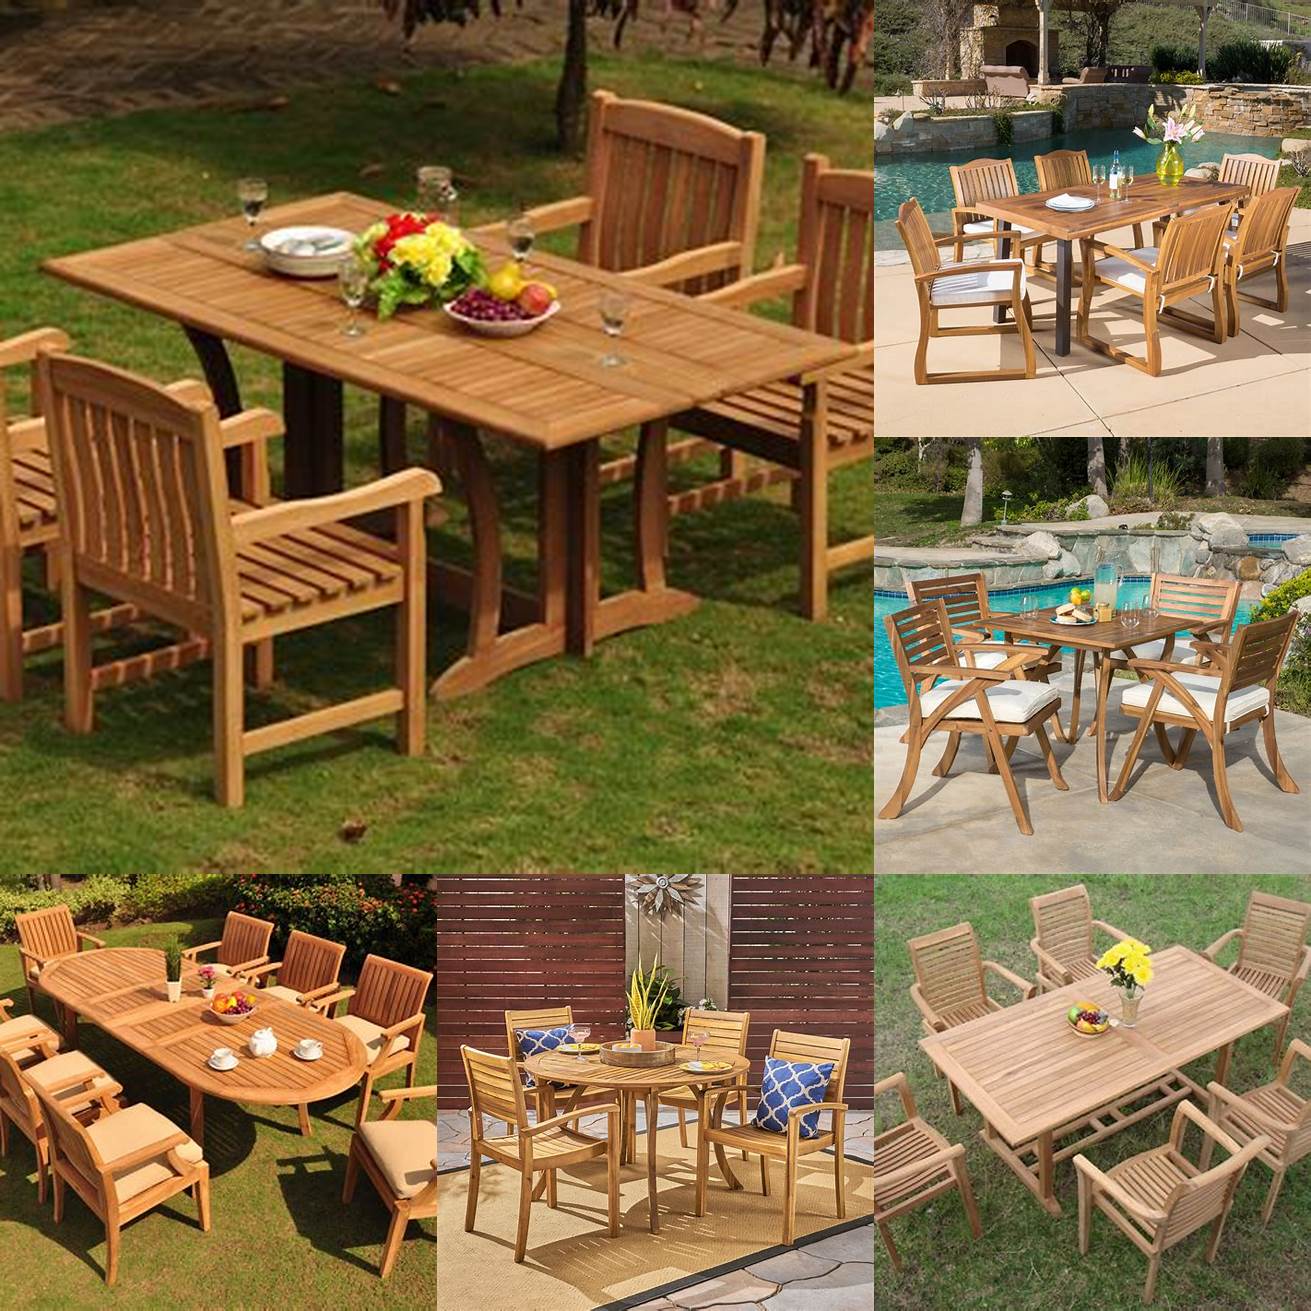 Where to Buy Teak Wood Outdoor Dining Sets